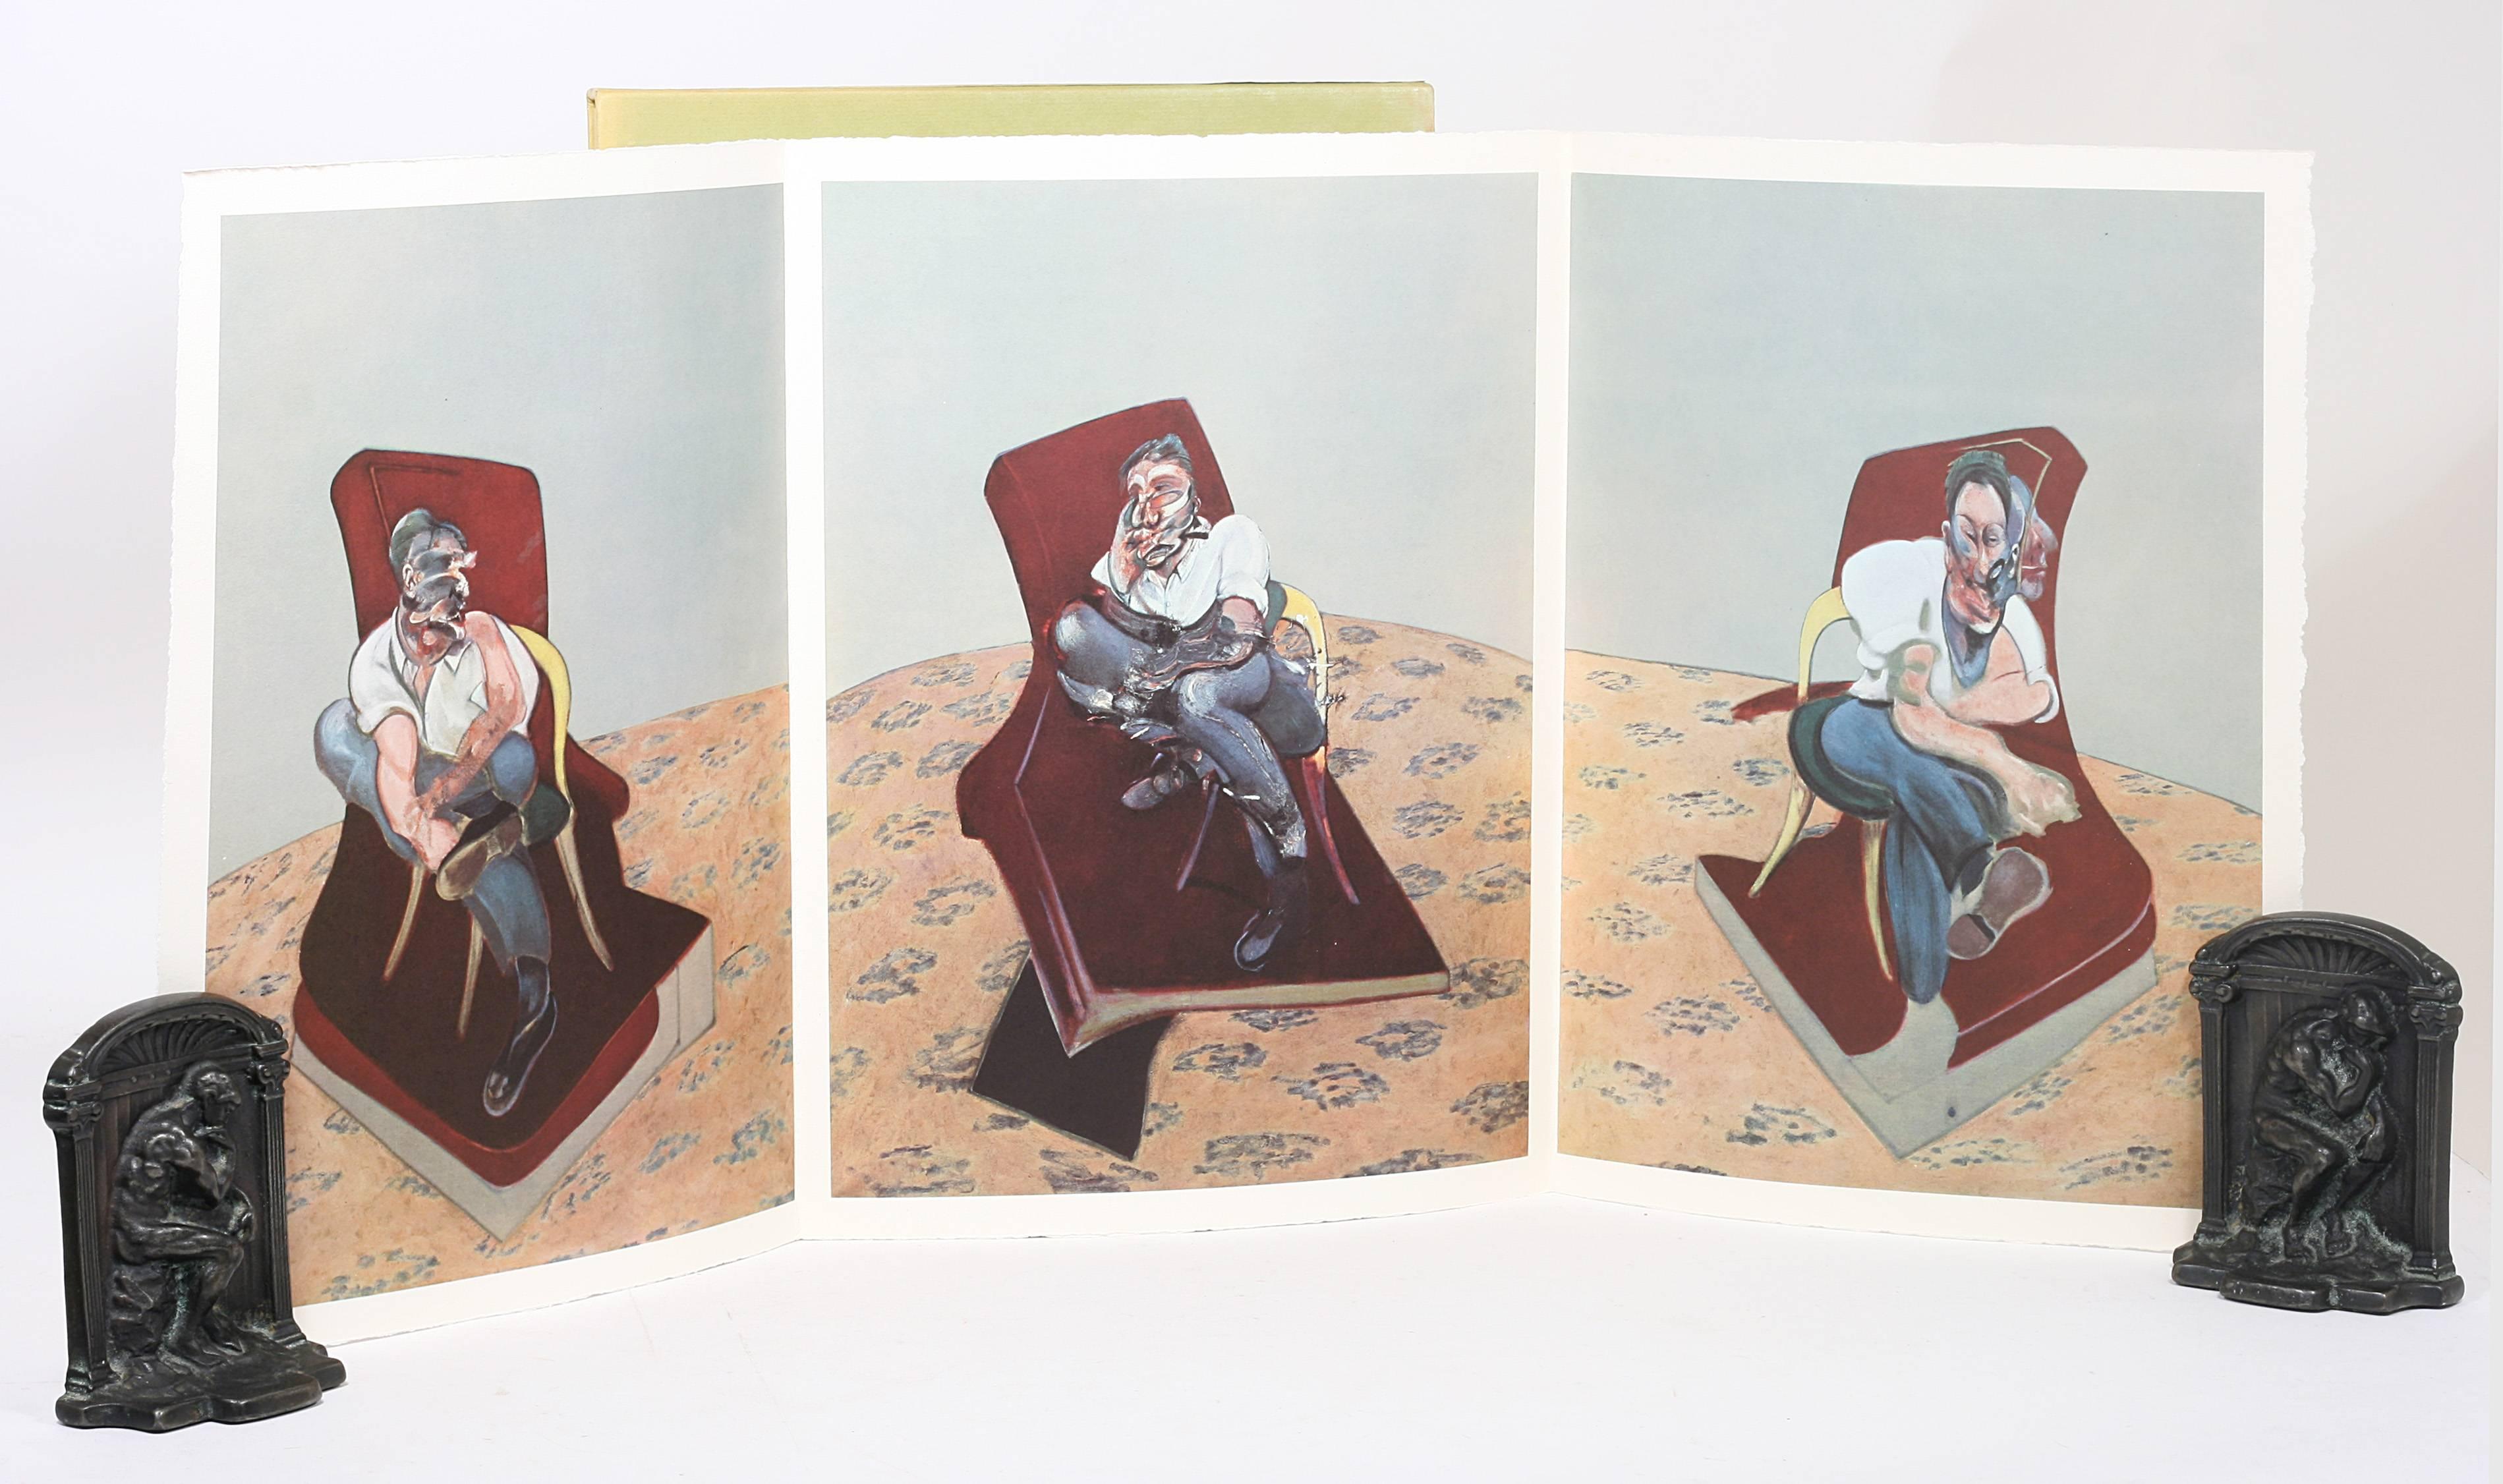 Limited edition, one of only 150 copies on Vélin de Rives. Dedicated to Francis Bacon and complete with five single-sheet color lithographs and one fold-out color triptych by Bacon.

Published in 1966 for the exhibition of 17 paintings at the